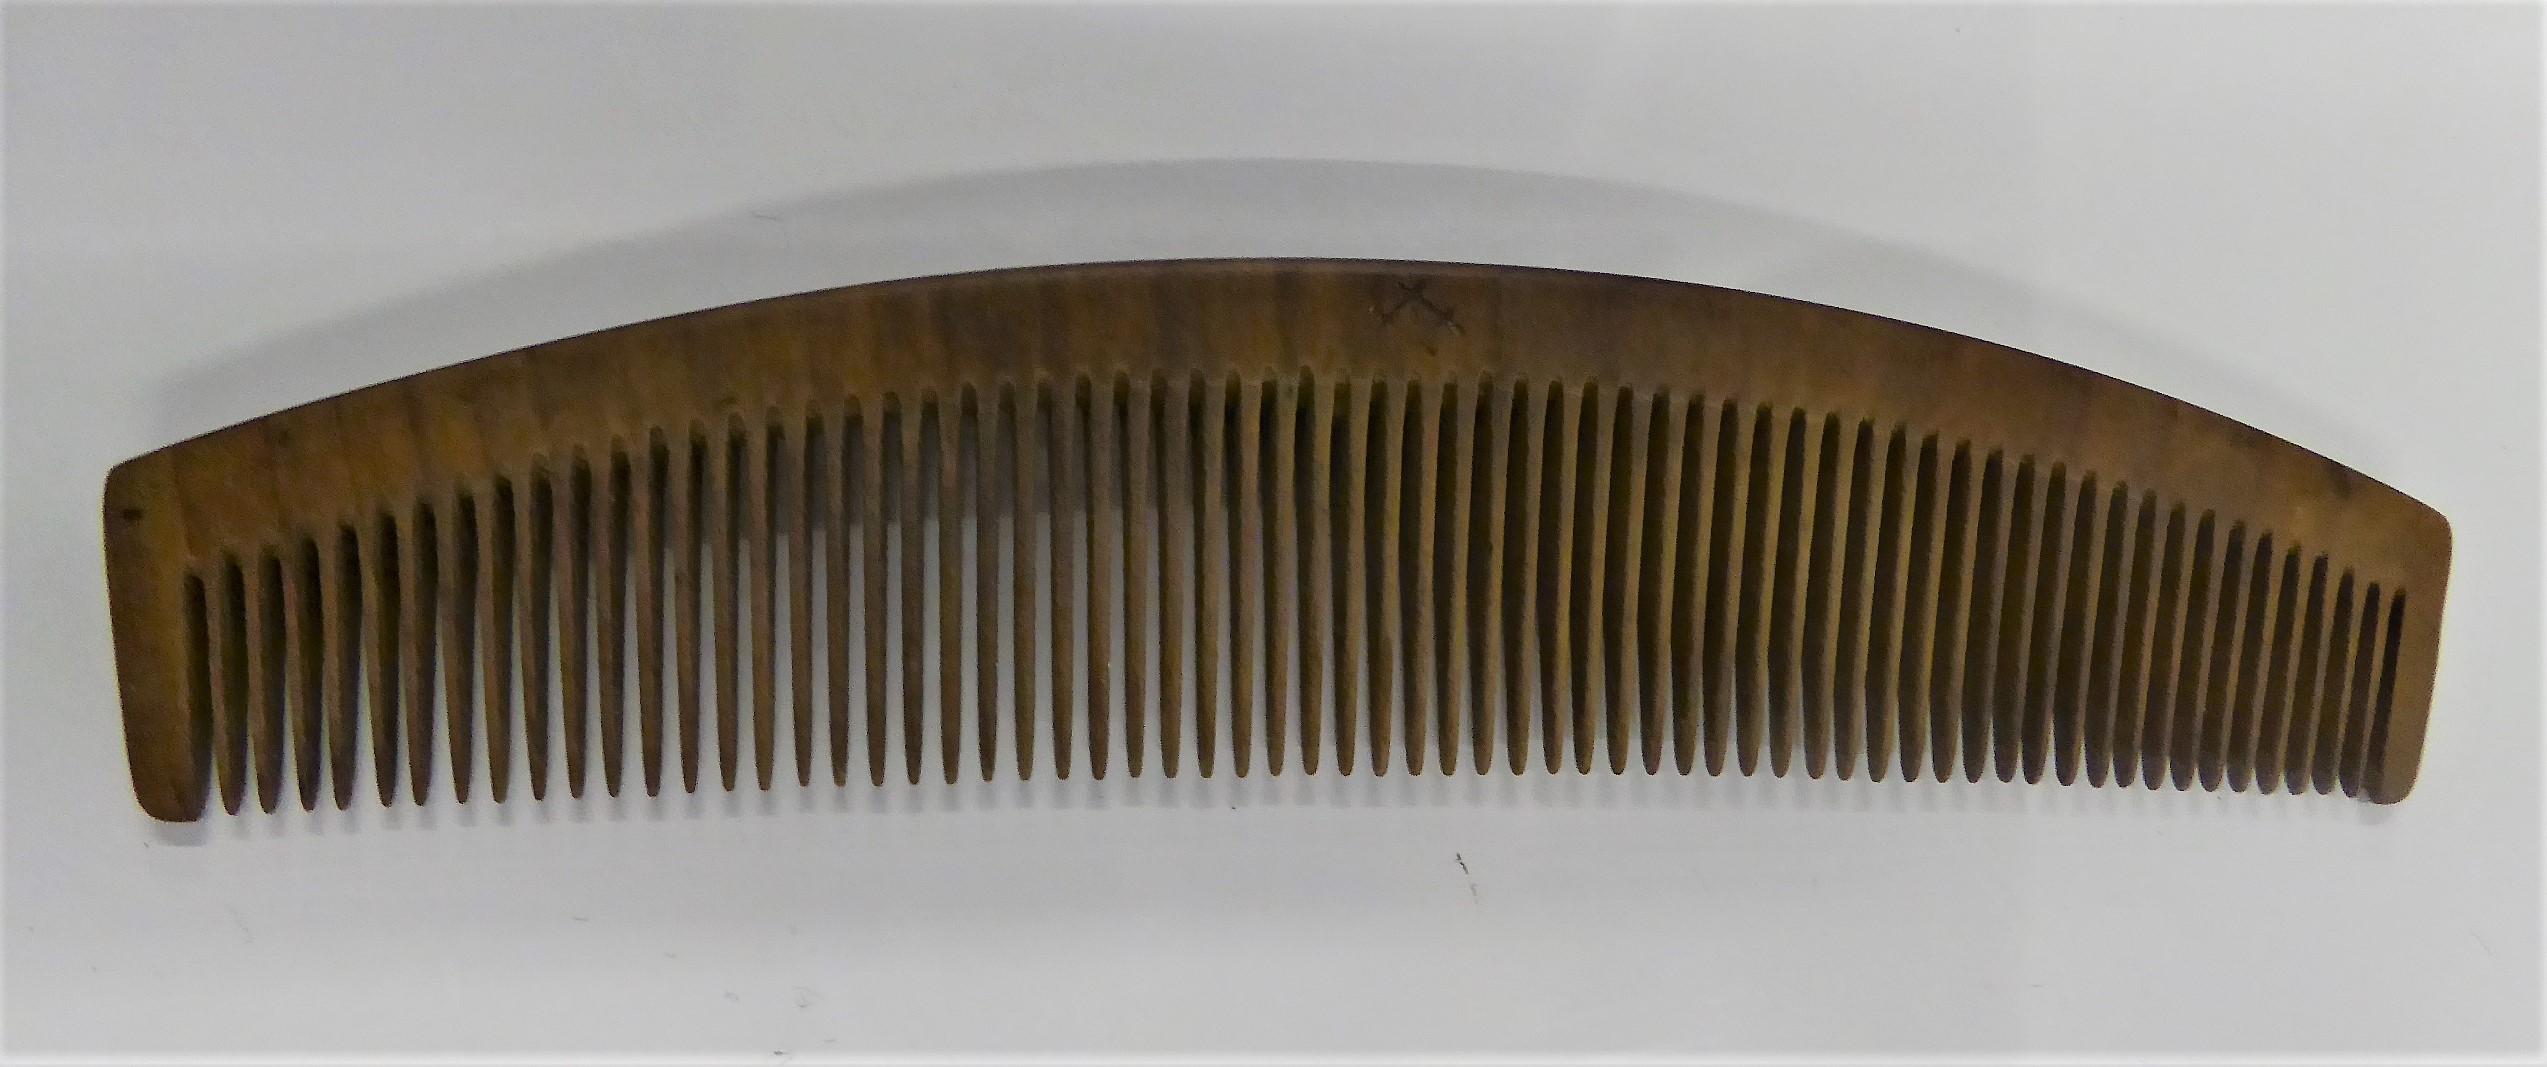 Vintage 1930s Japanese Tsuge Wood Comb Collection 1